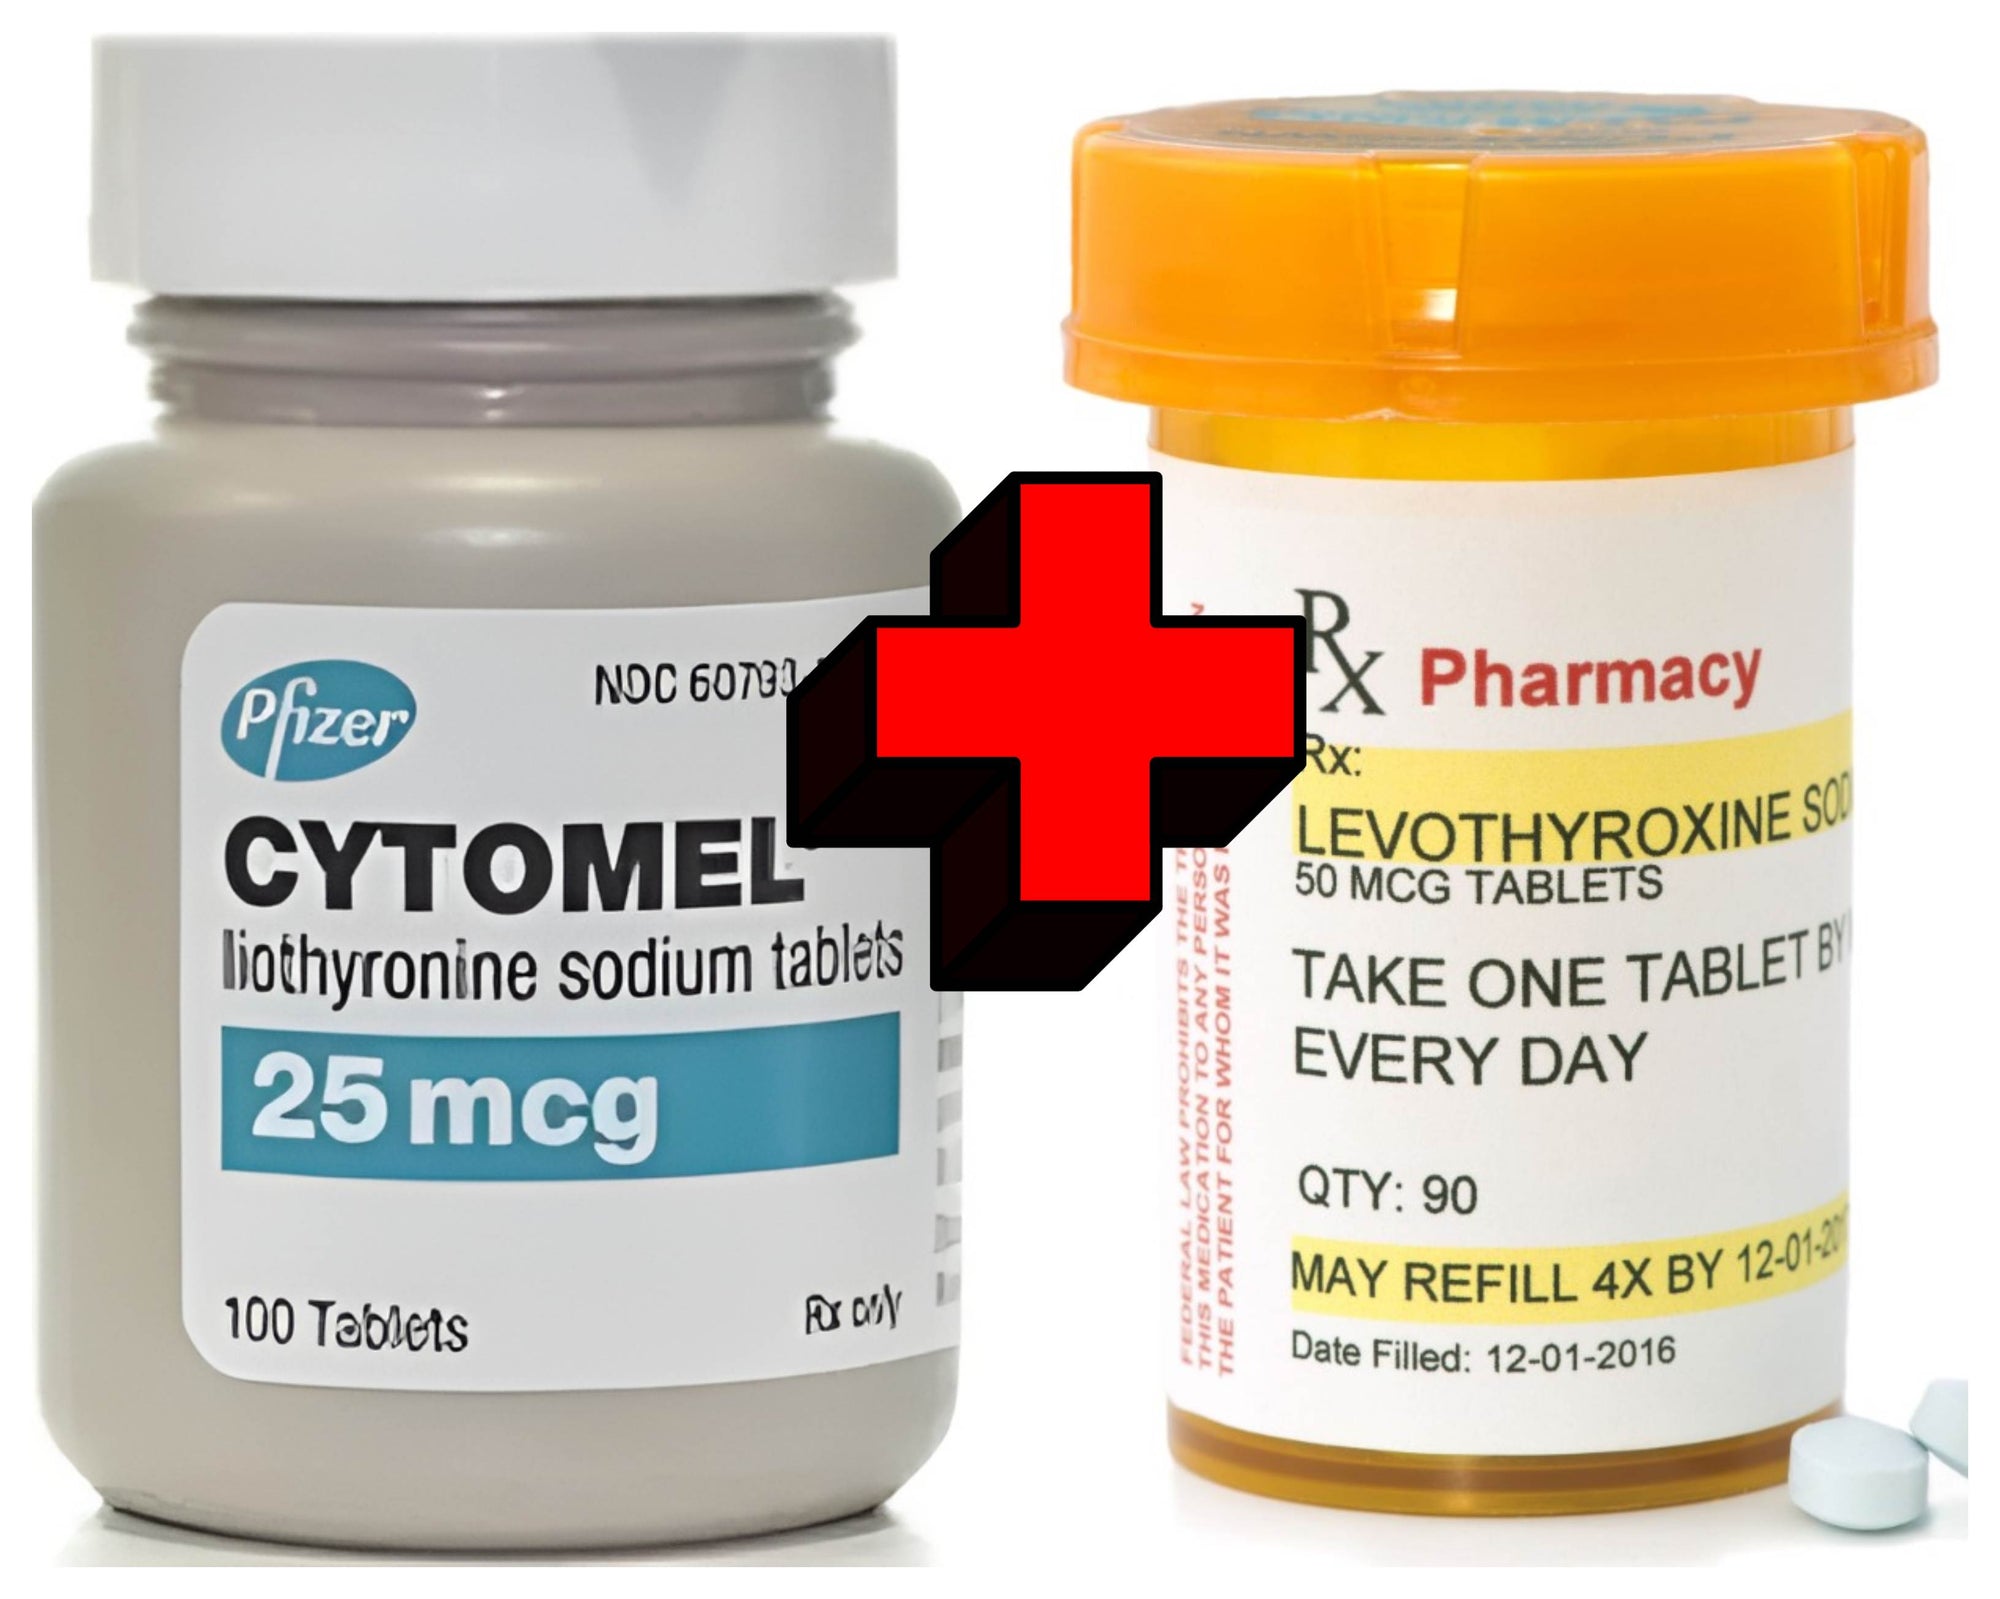 Can you combine levothyroxine and Cytomel for thyroid?